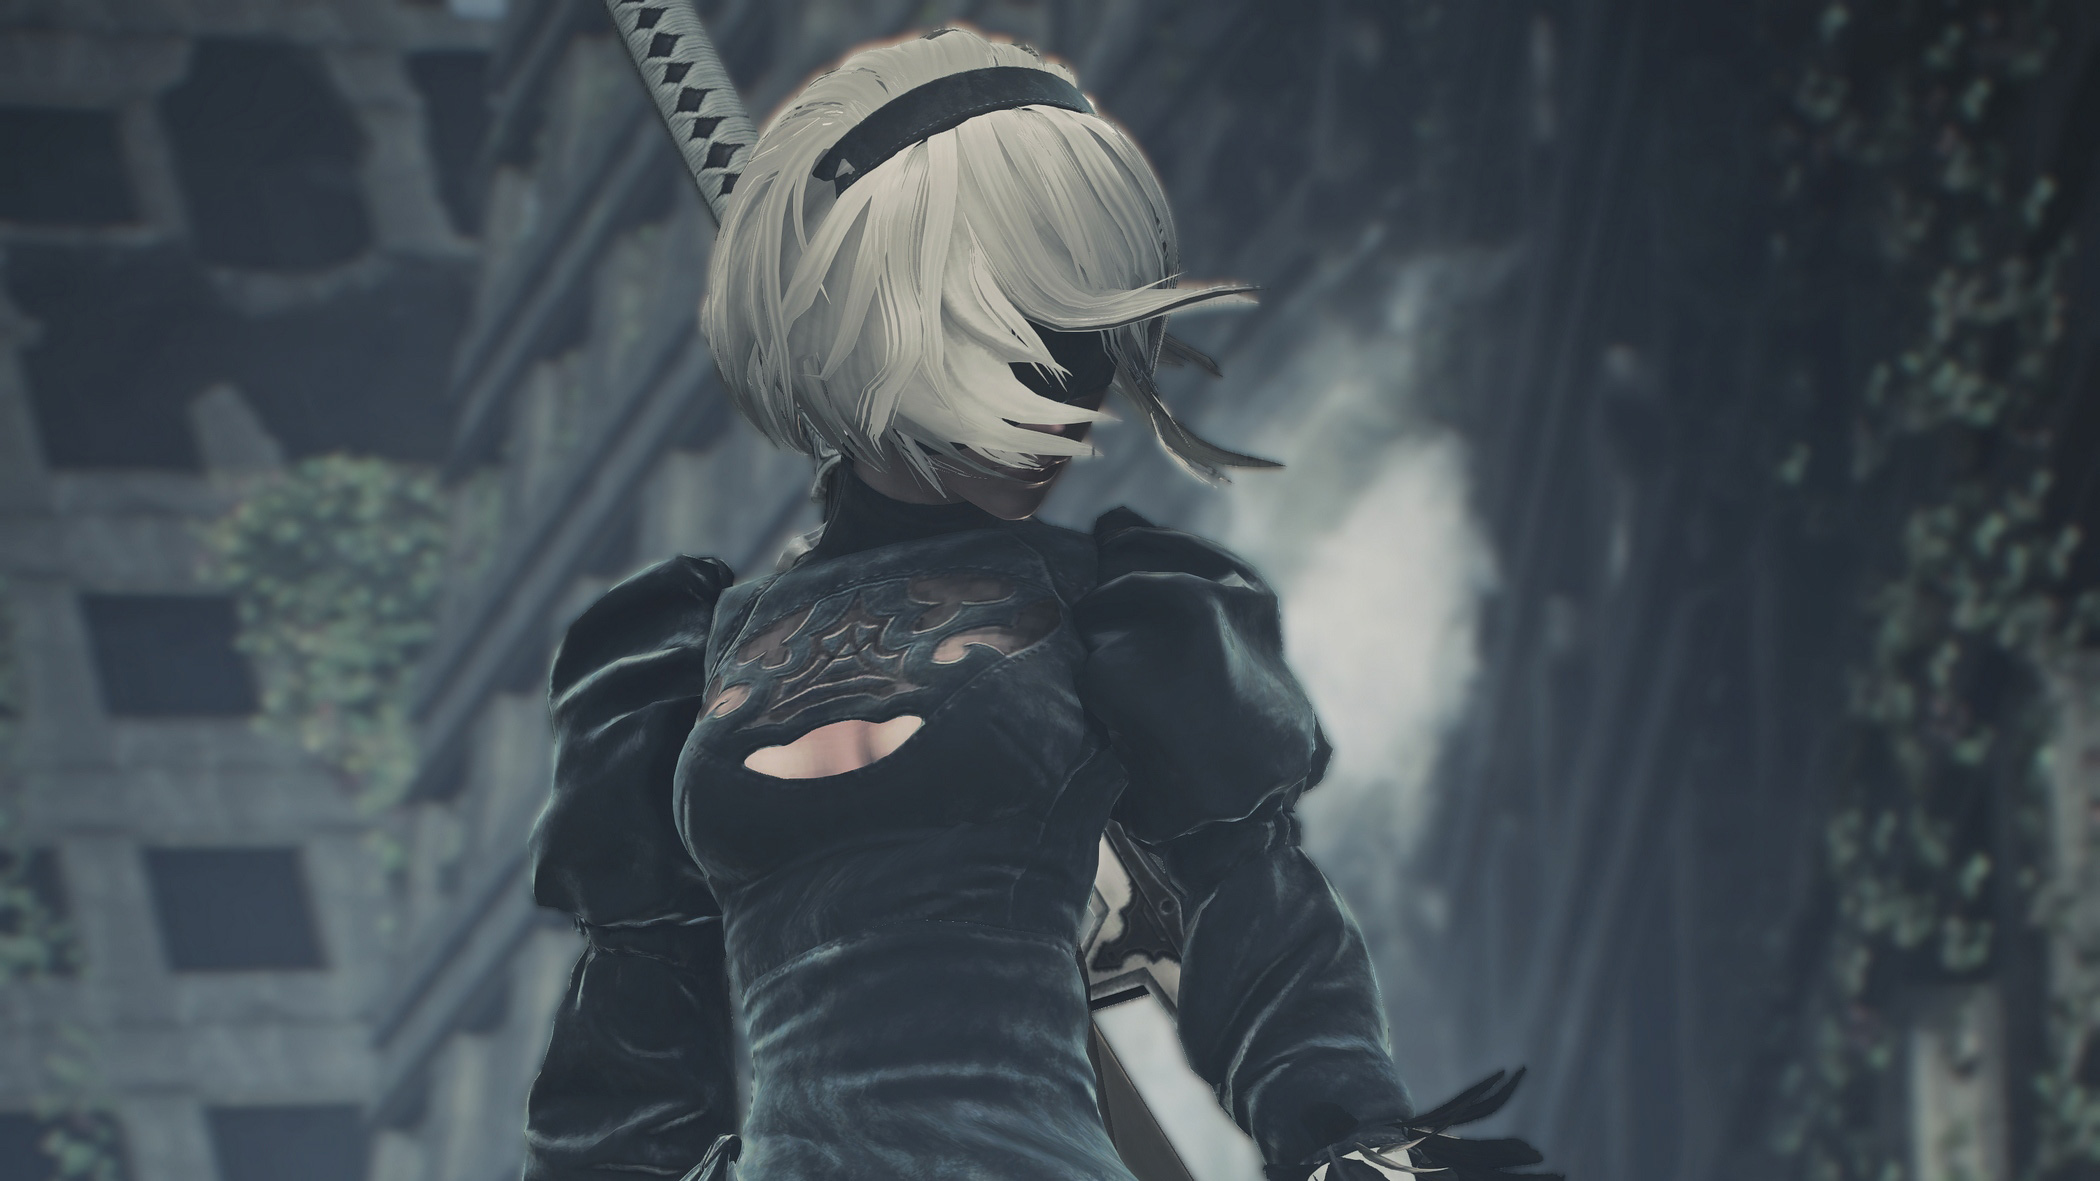 A2 Nier Automata Art Hd Games 4k Wallpapers Images Backgrounds Photos And Pictures 